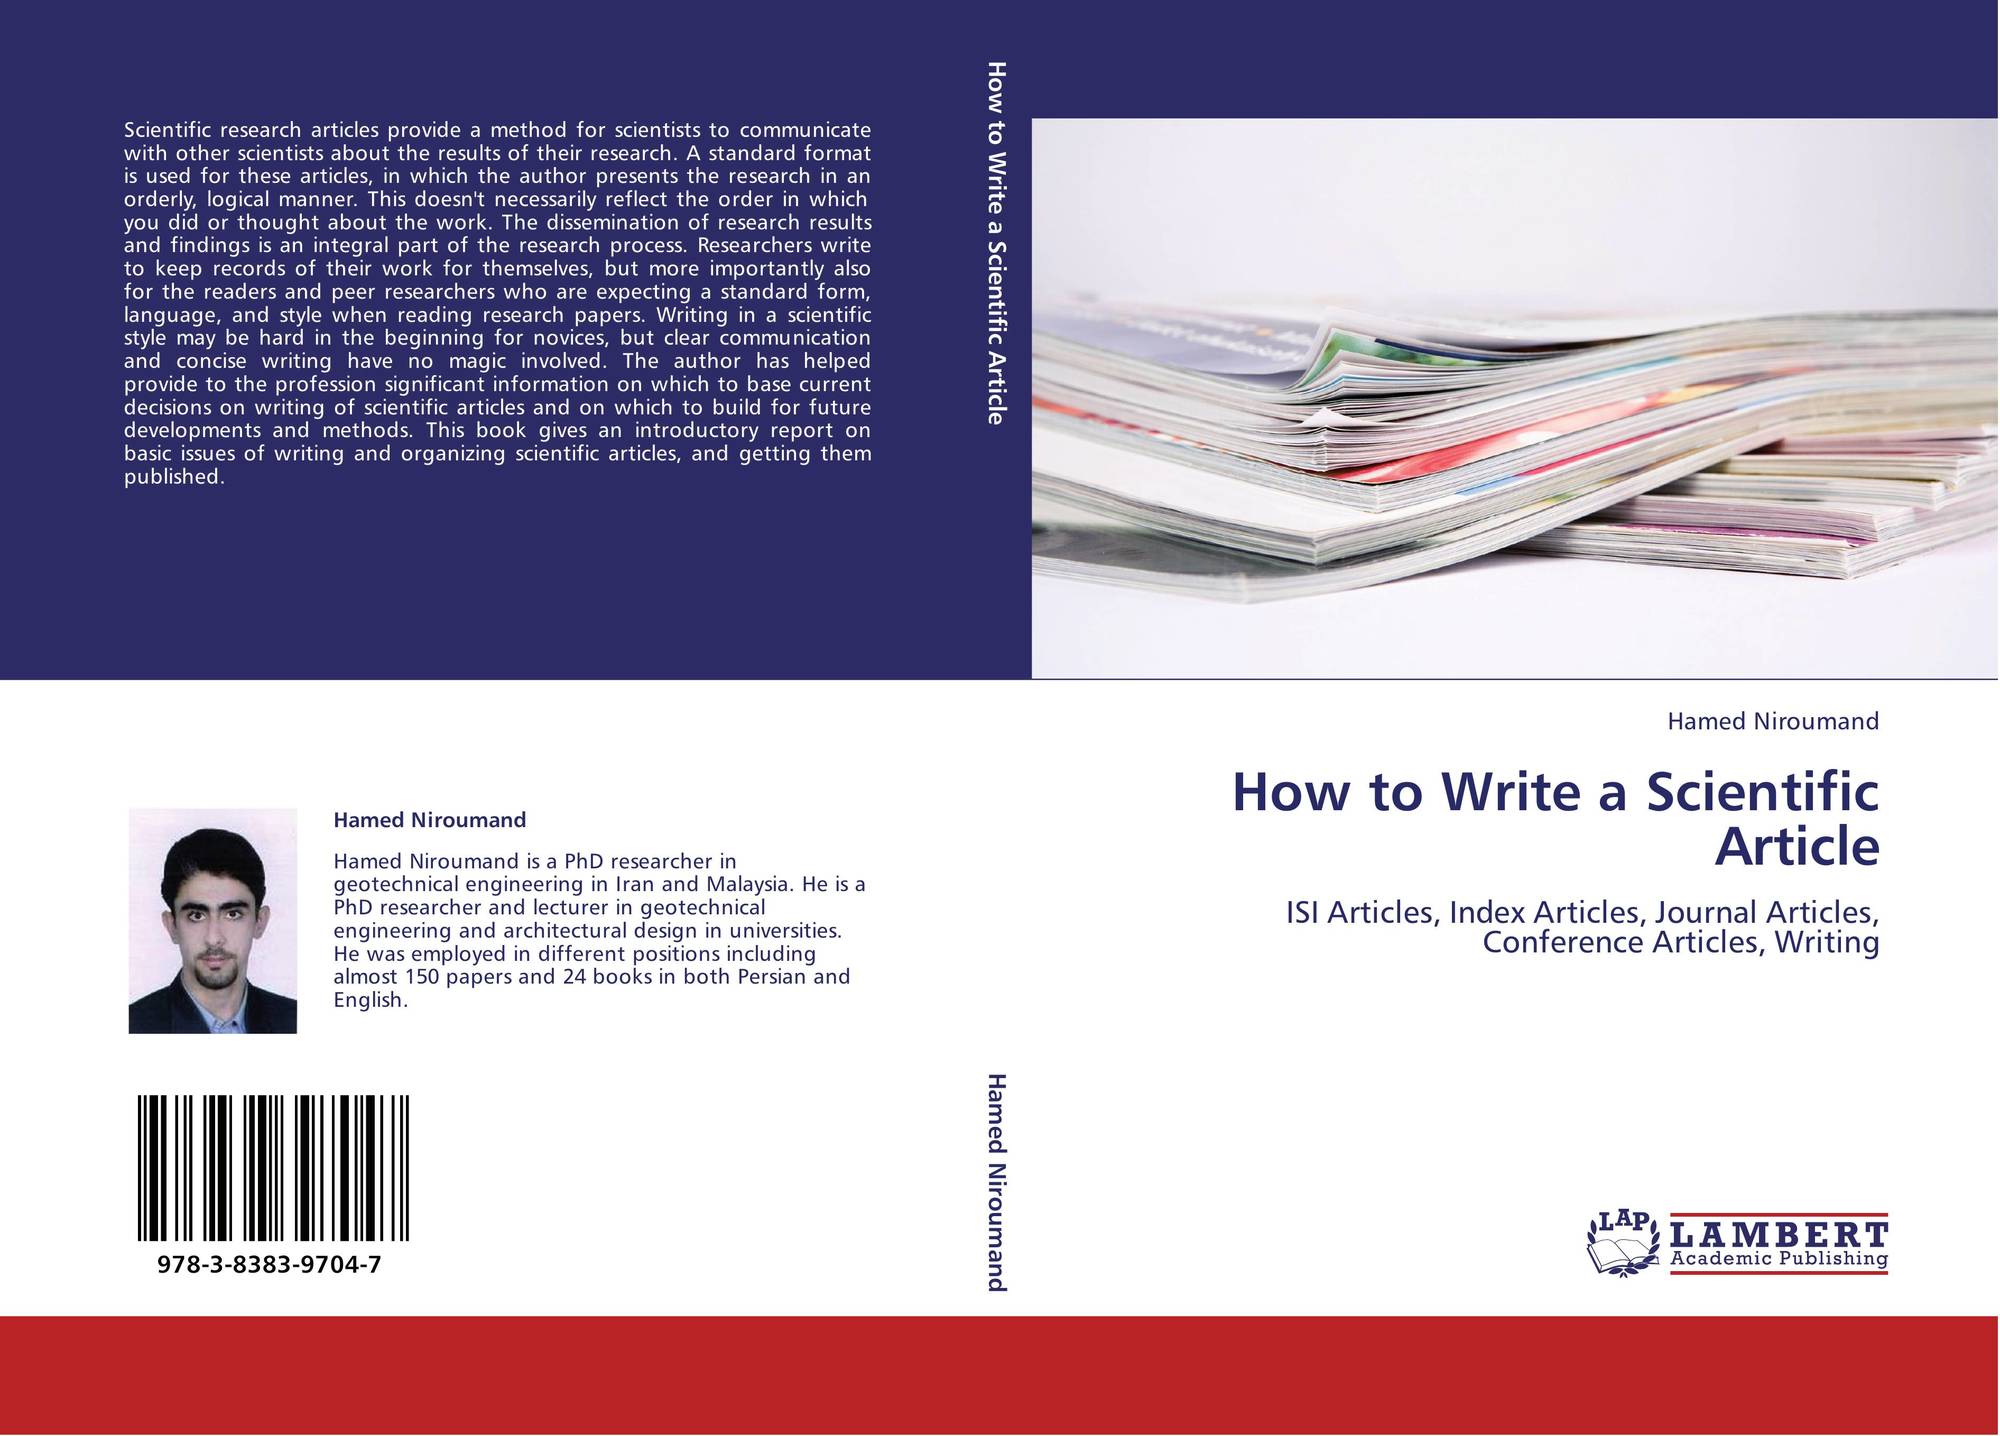 how to write an scientific article